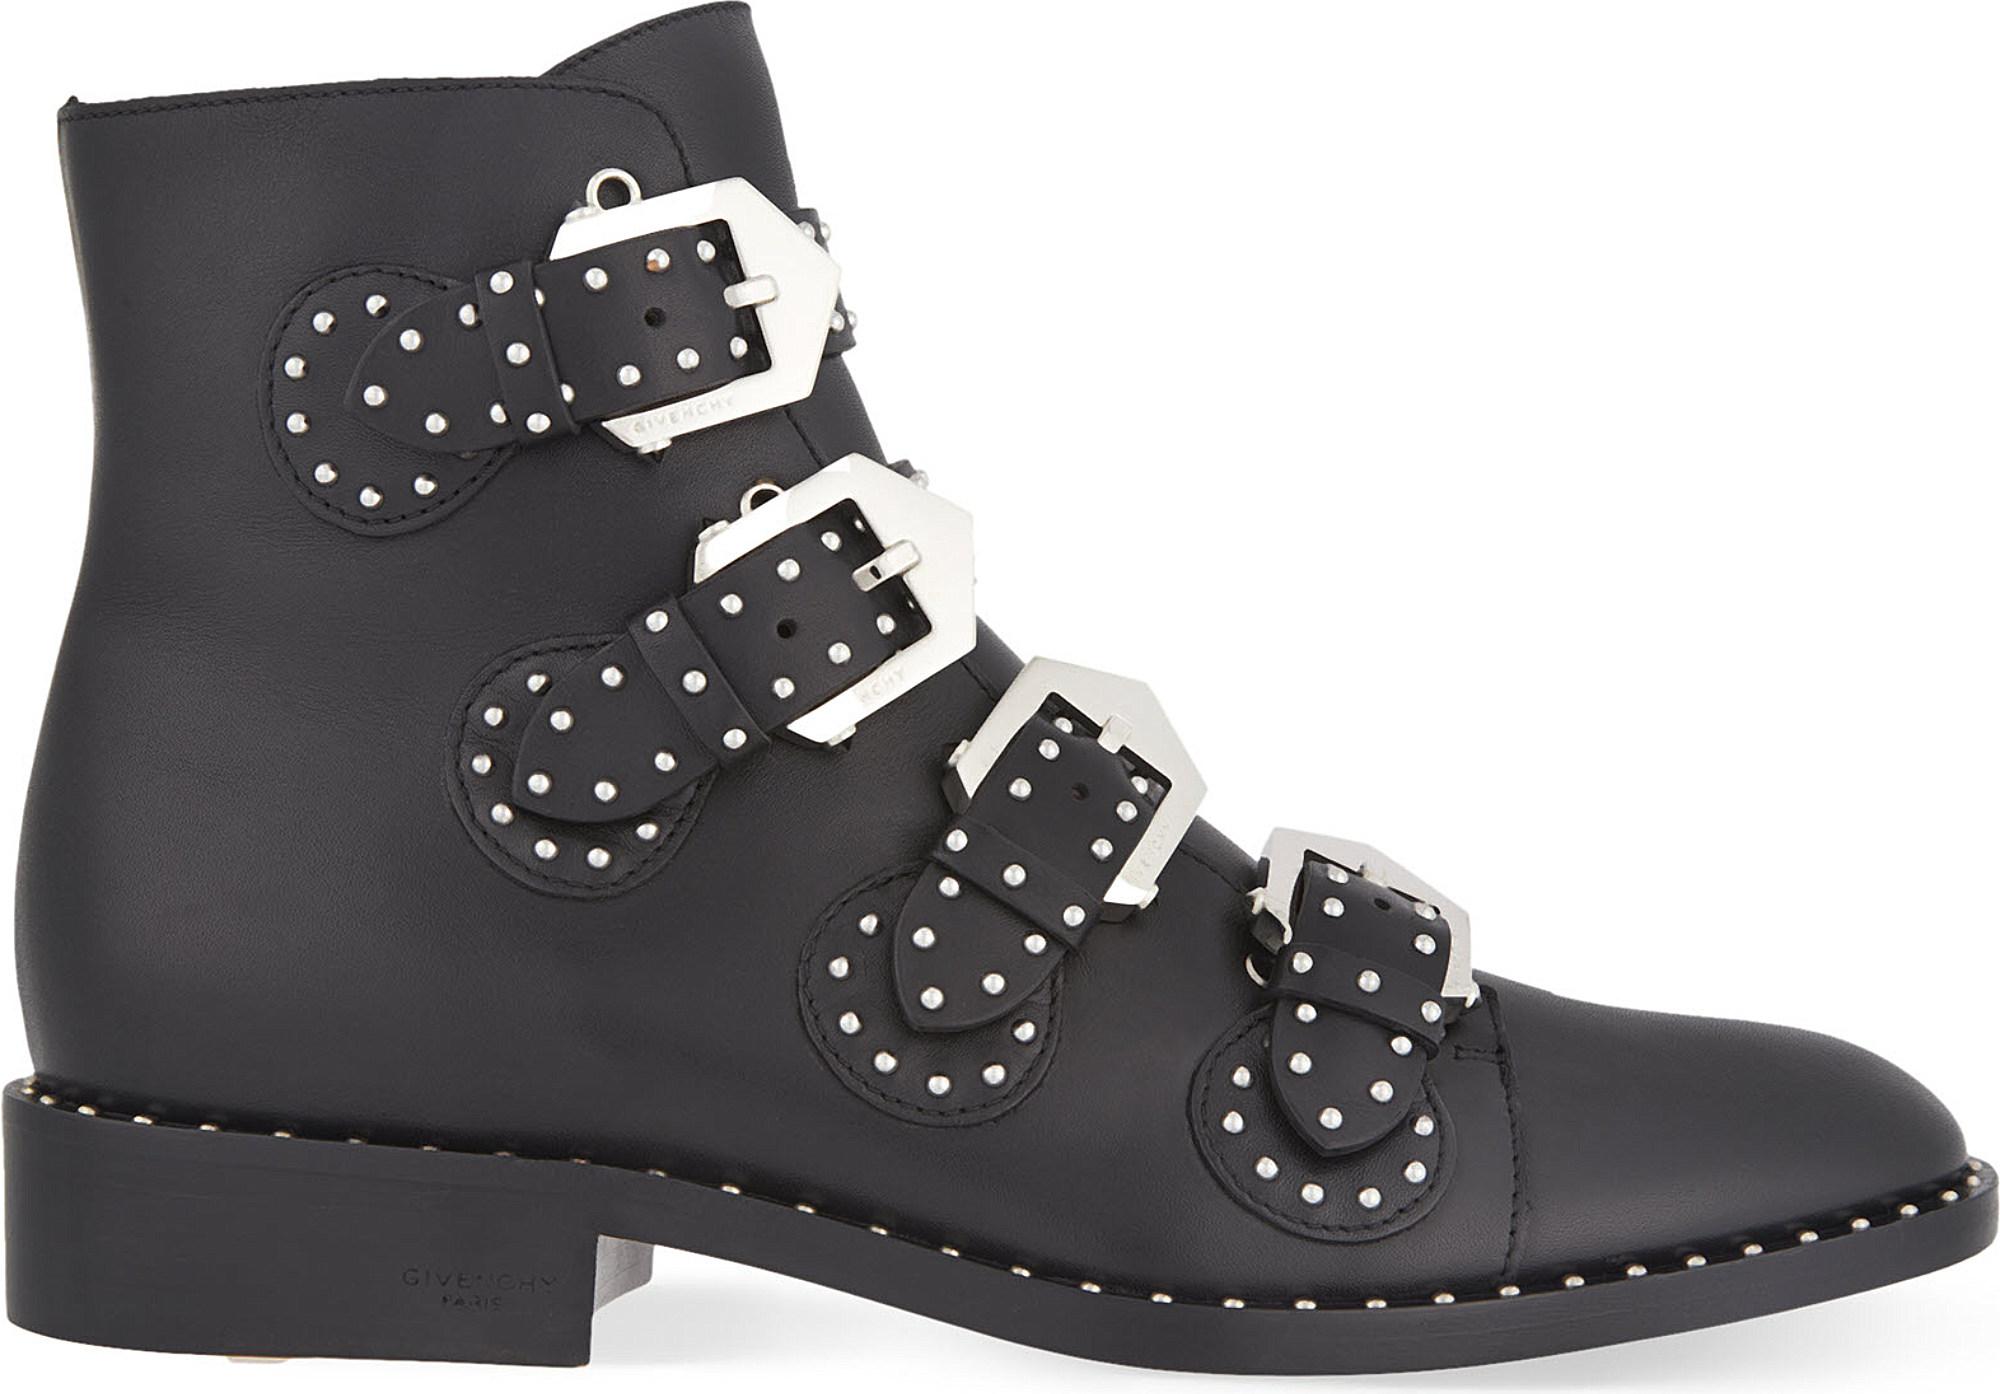 Lyst - Givenchy K-line Leather Boots in Blue - Save 62.13793103448276%